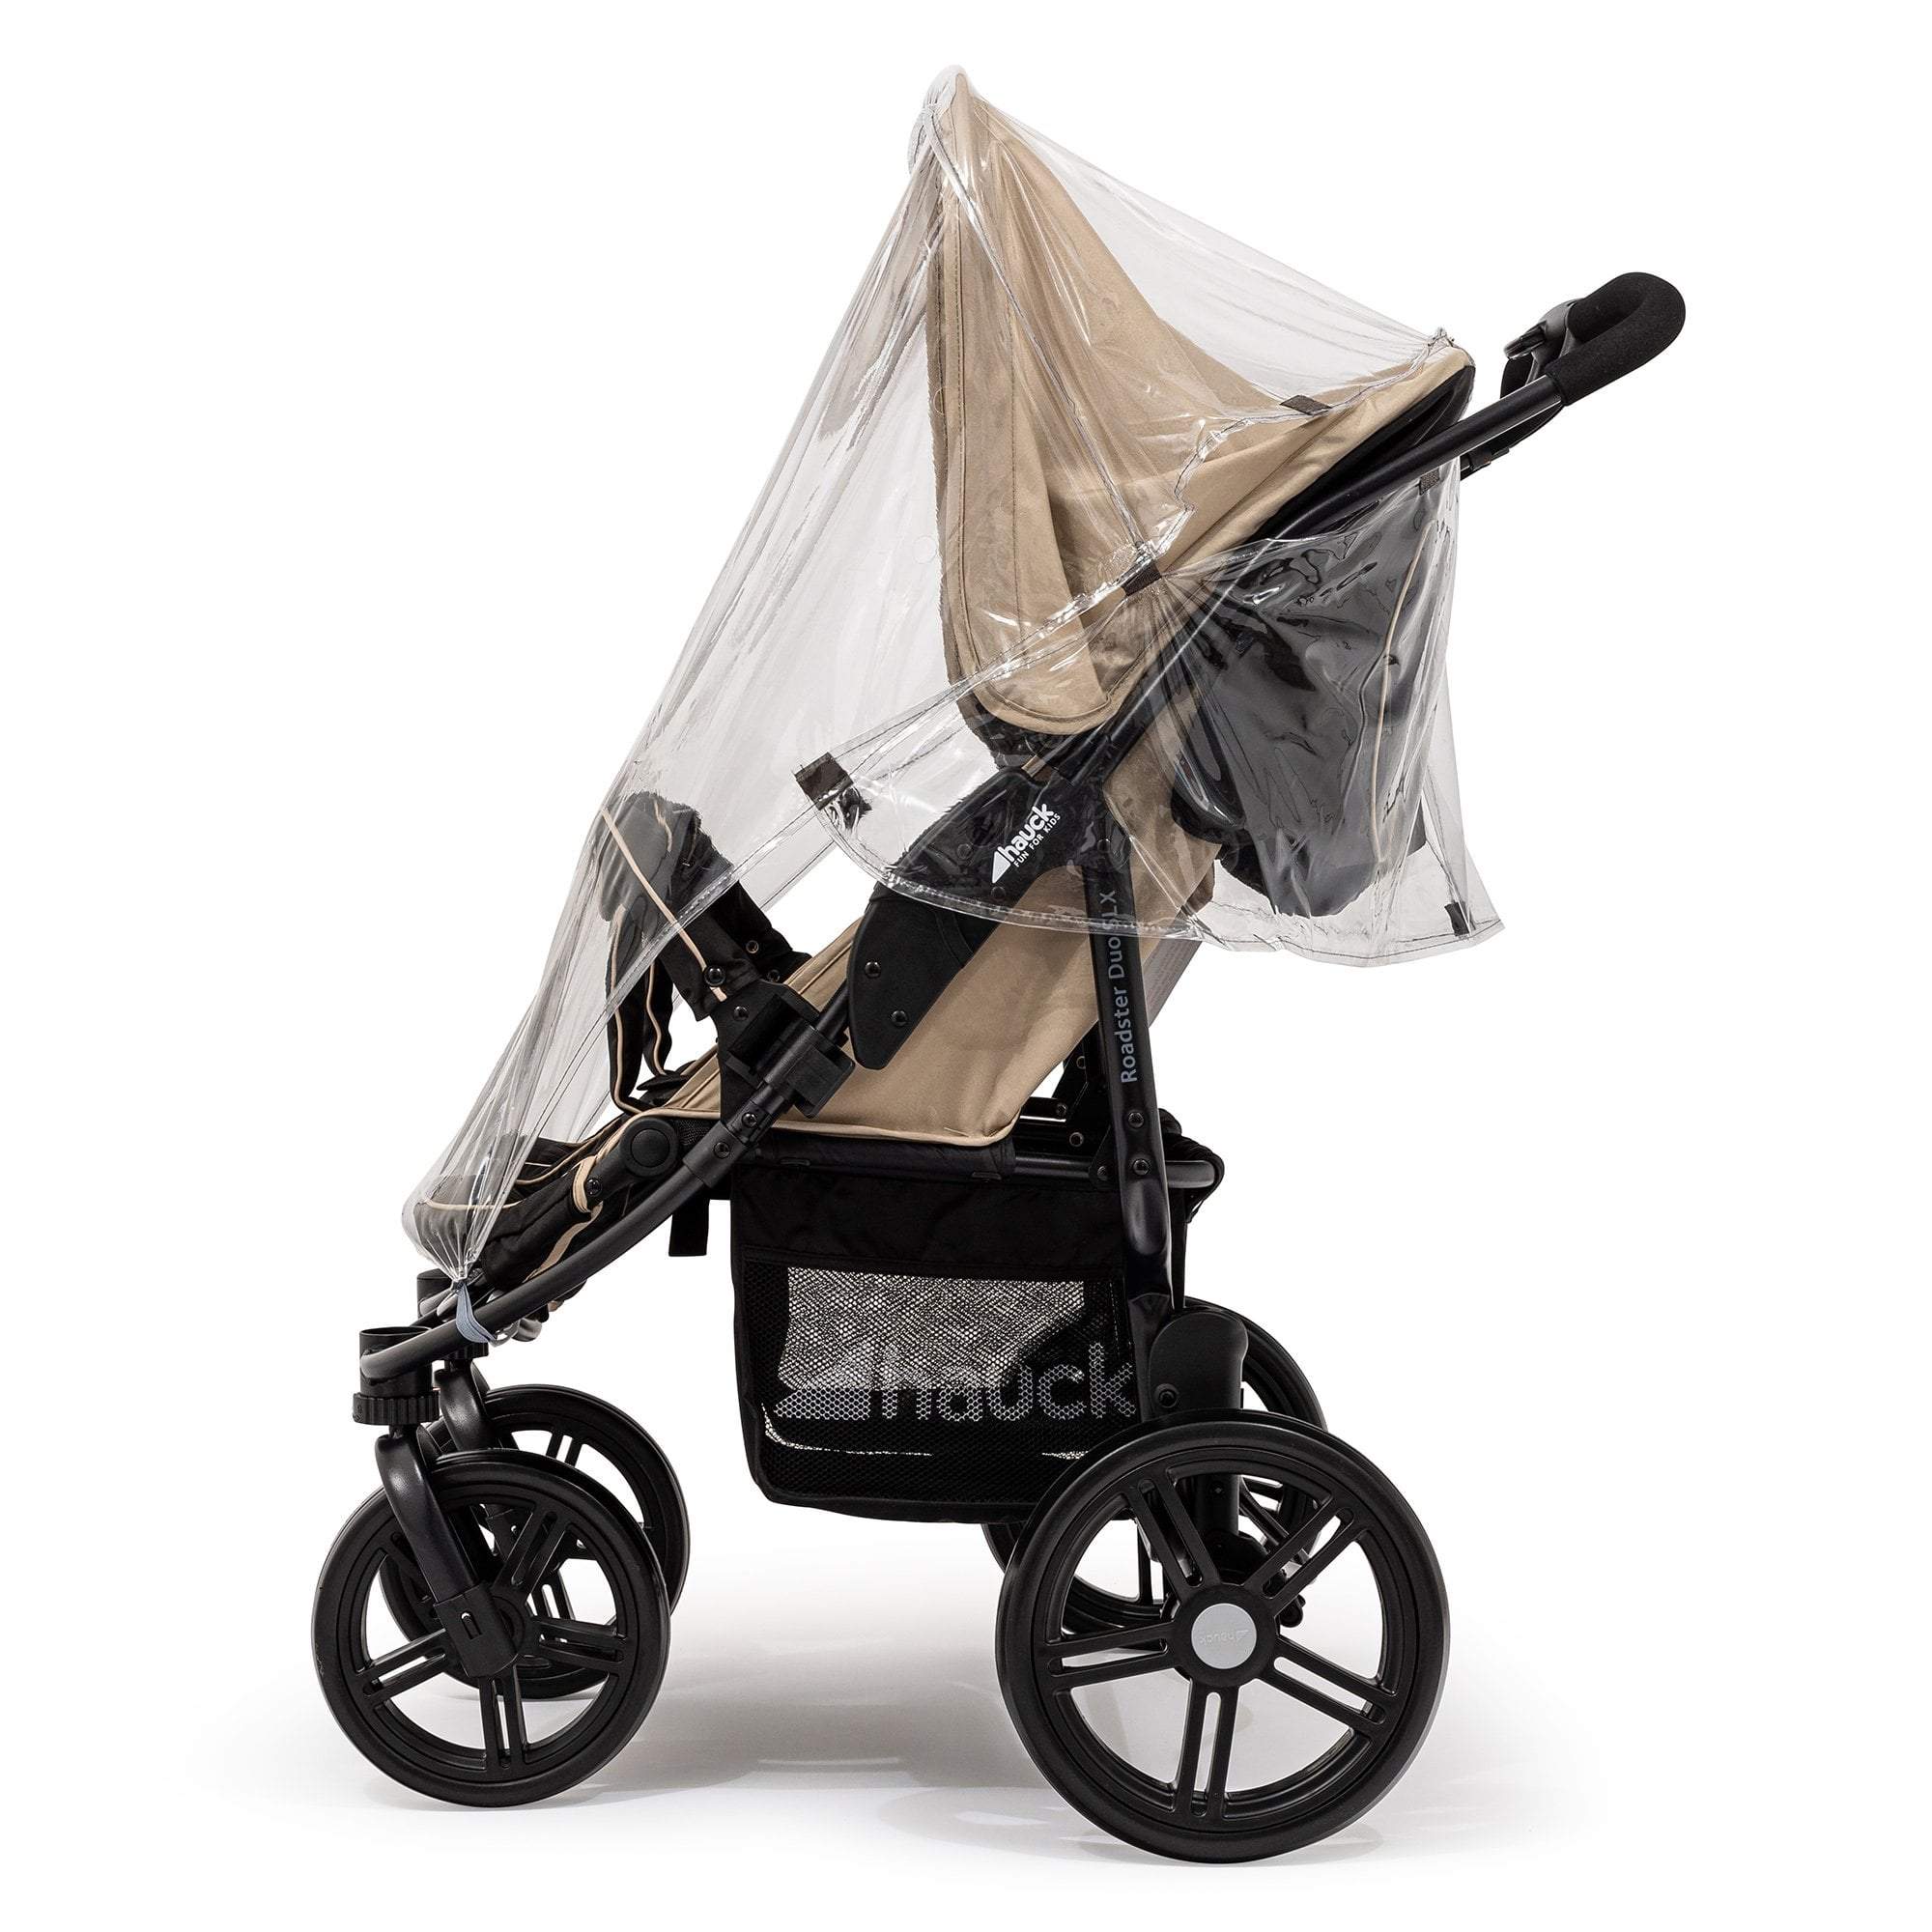 Side by Side Raincover Compatible with BabyDan - For Your Little One